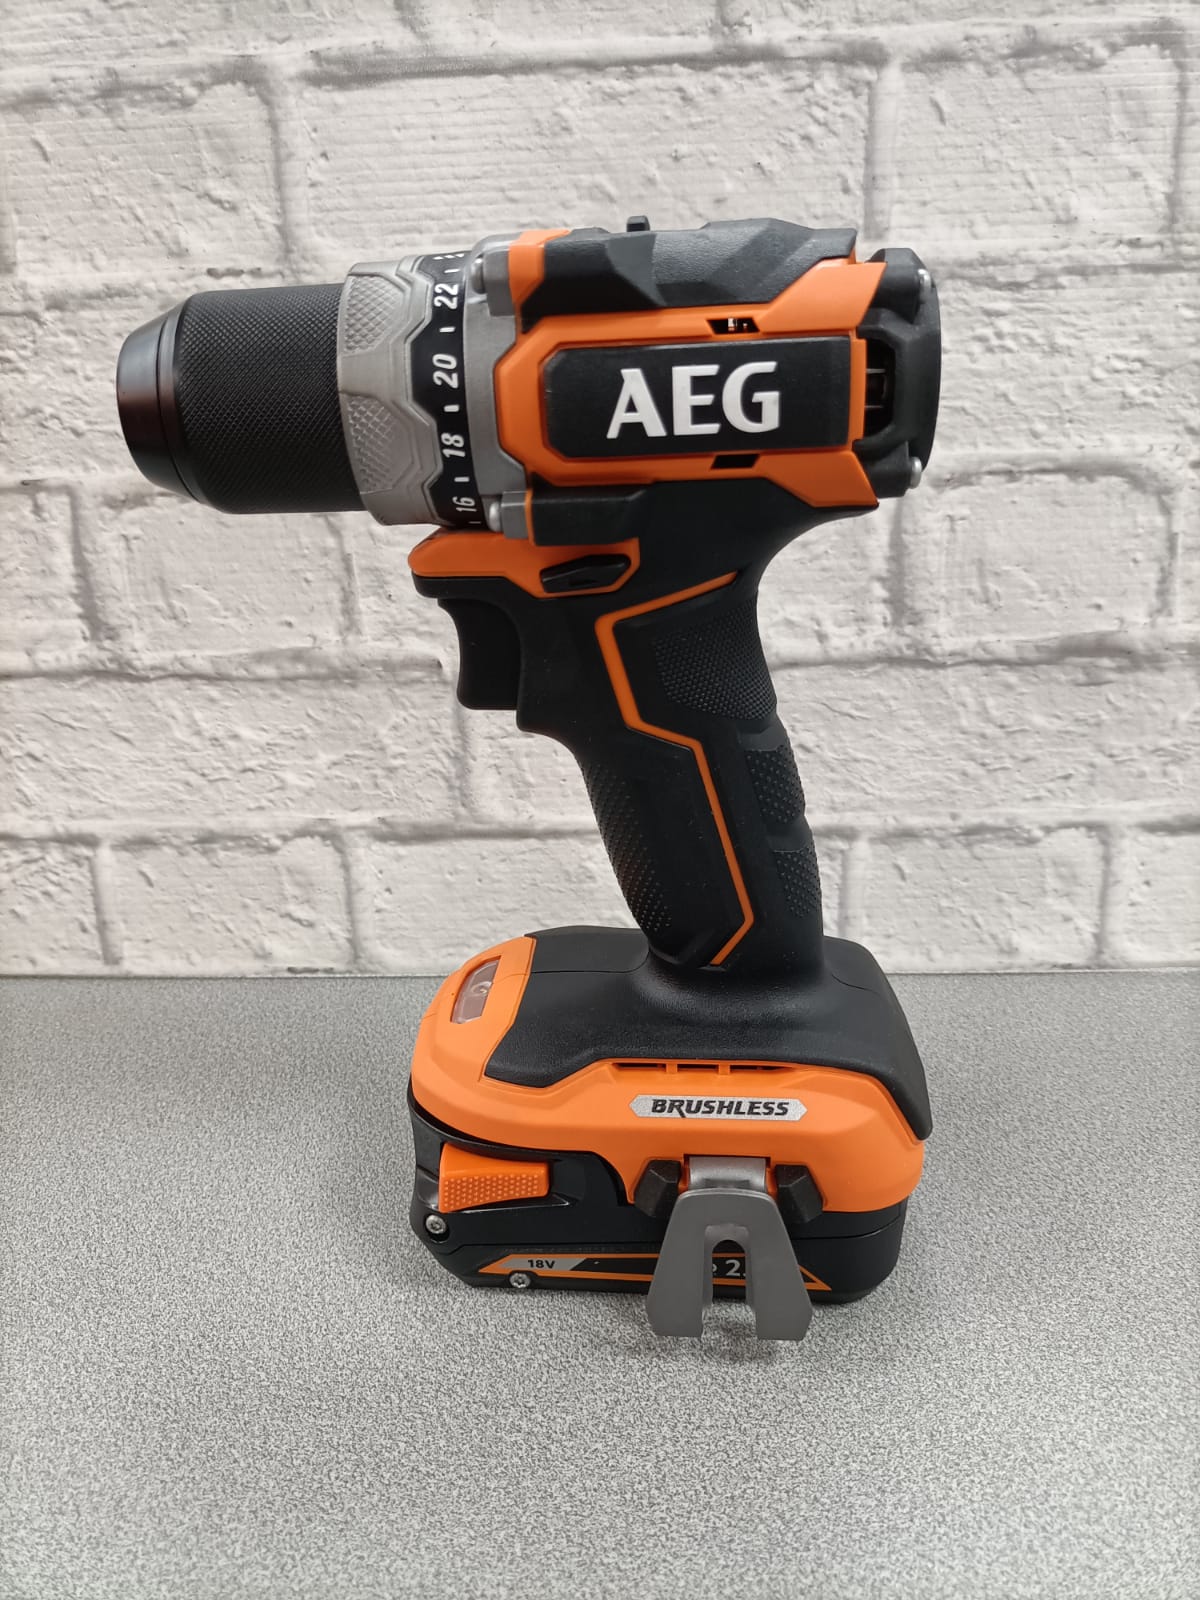 SUBCOMPACT brushless drill driver 18V 2 x 2.0Ah in case - AEG